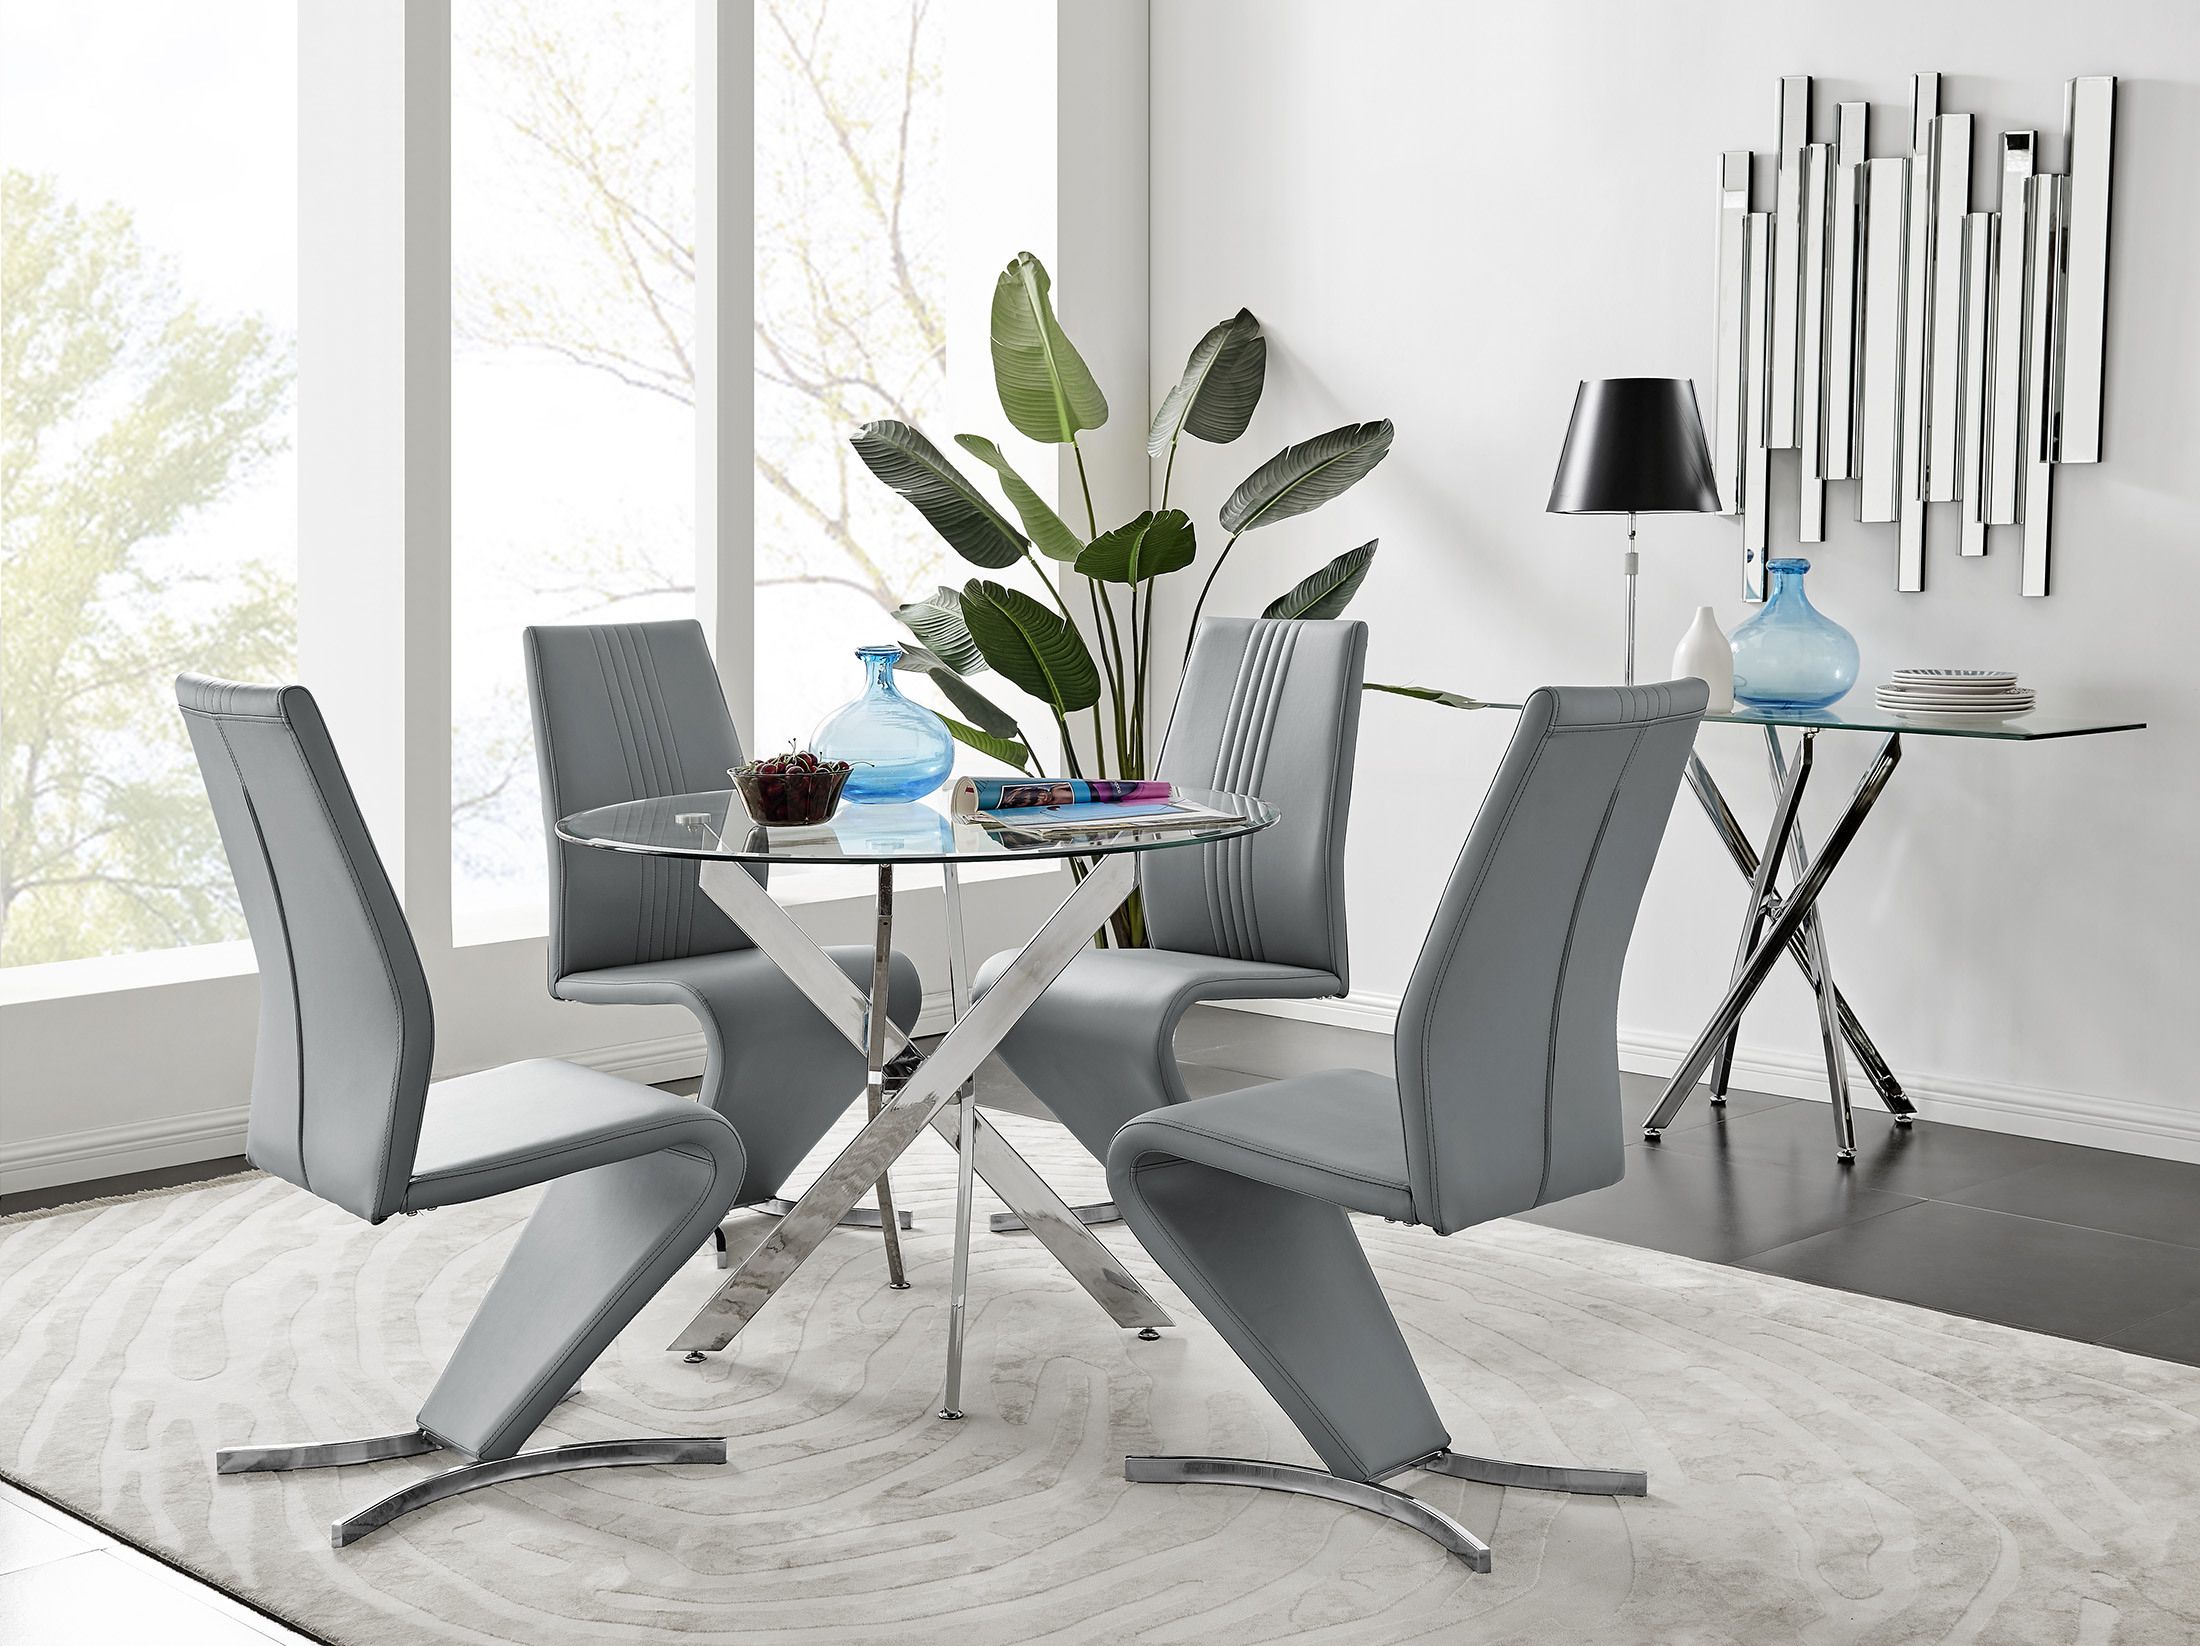 Novara Chrome Metal Dining Table & 4 Willow Chairs Throughout Most Recently Released Chrome Metal Dining Tables (View 5 of 15)